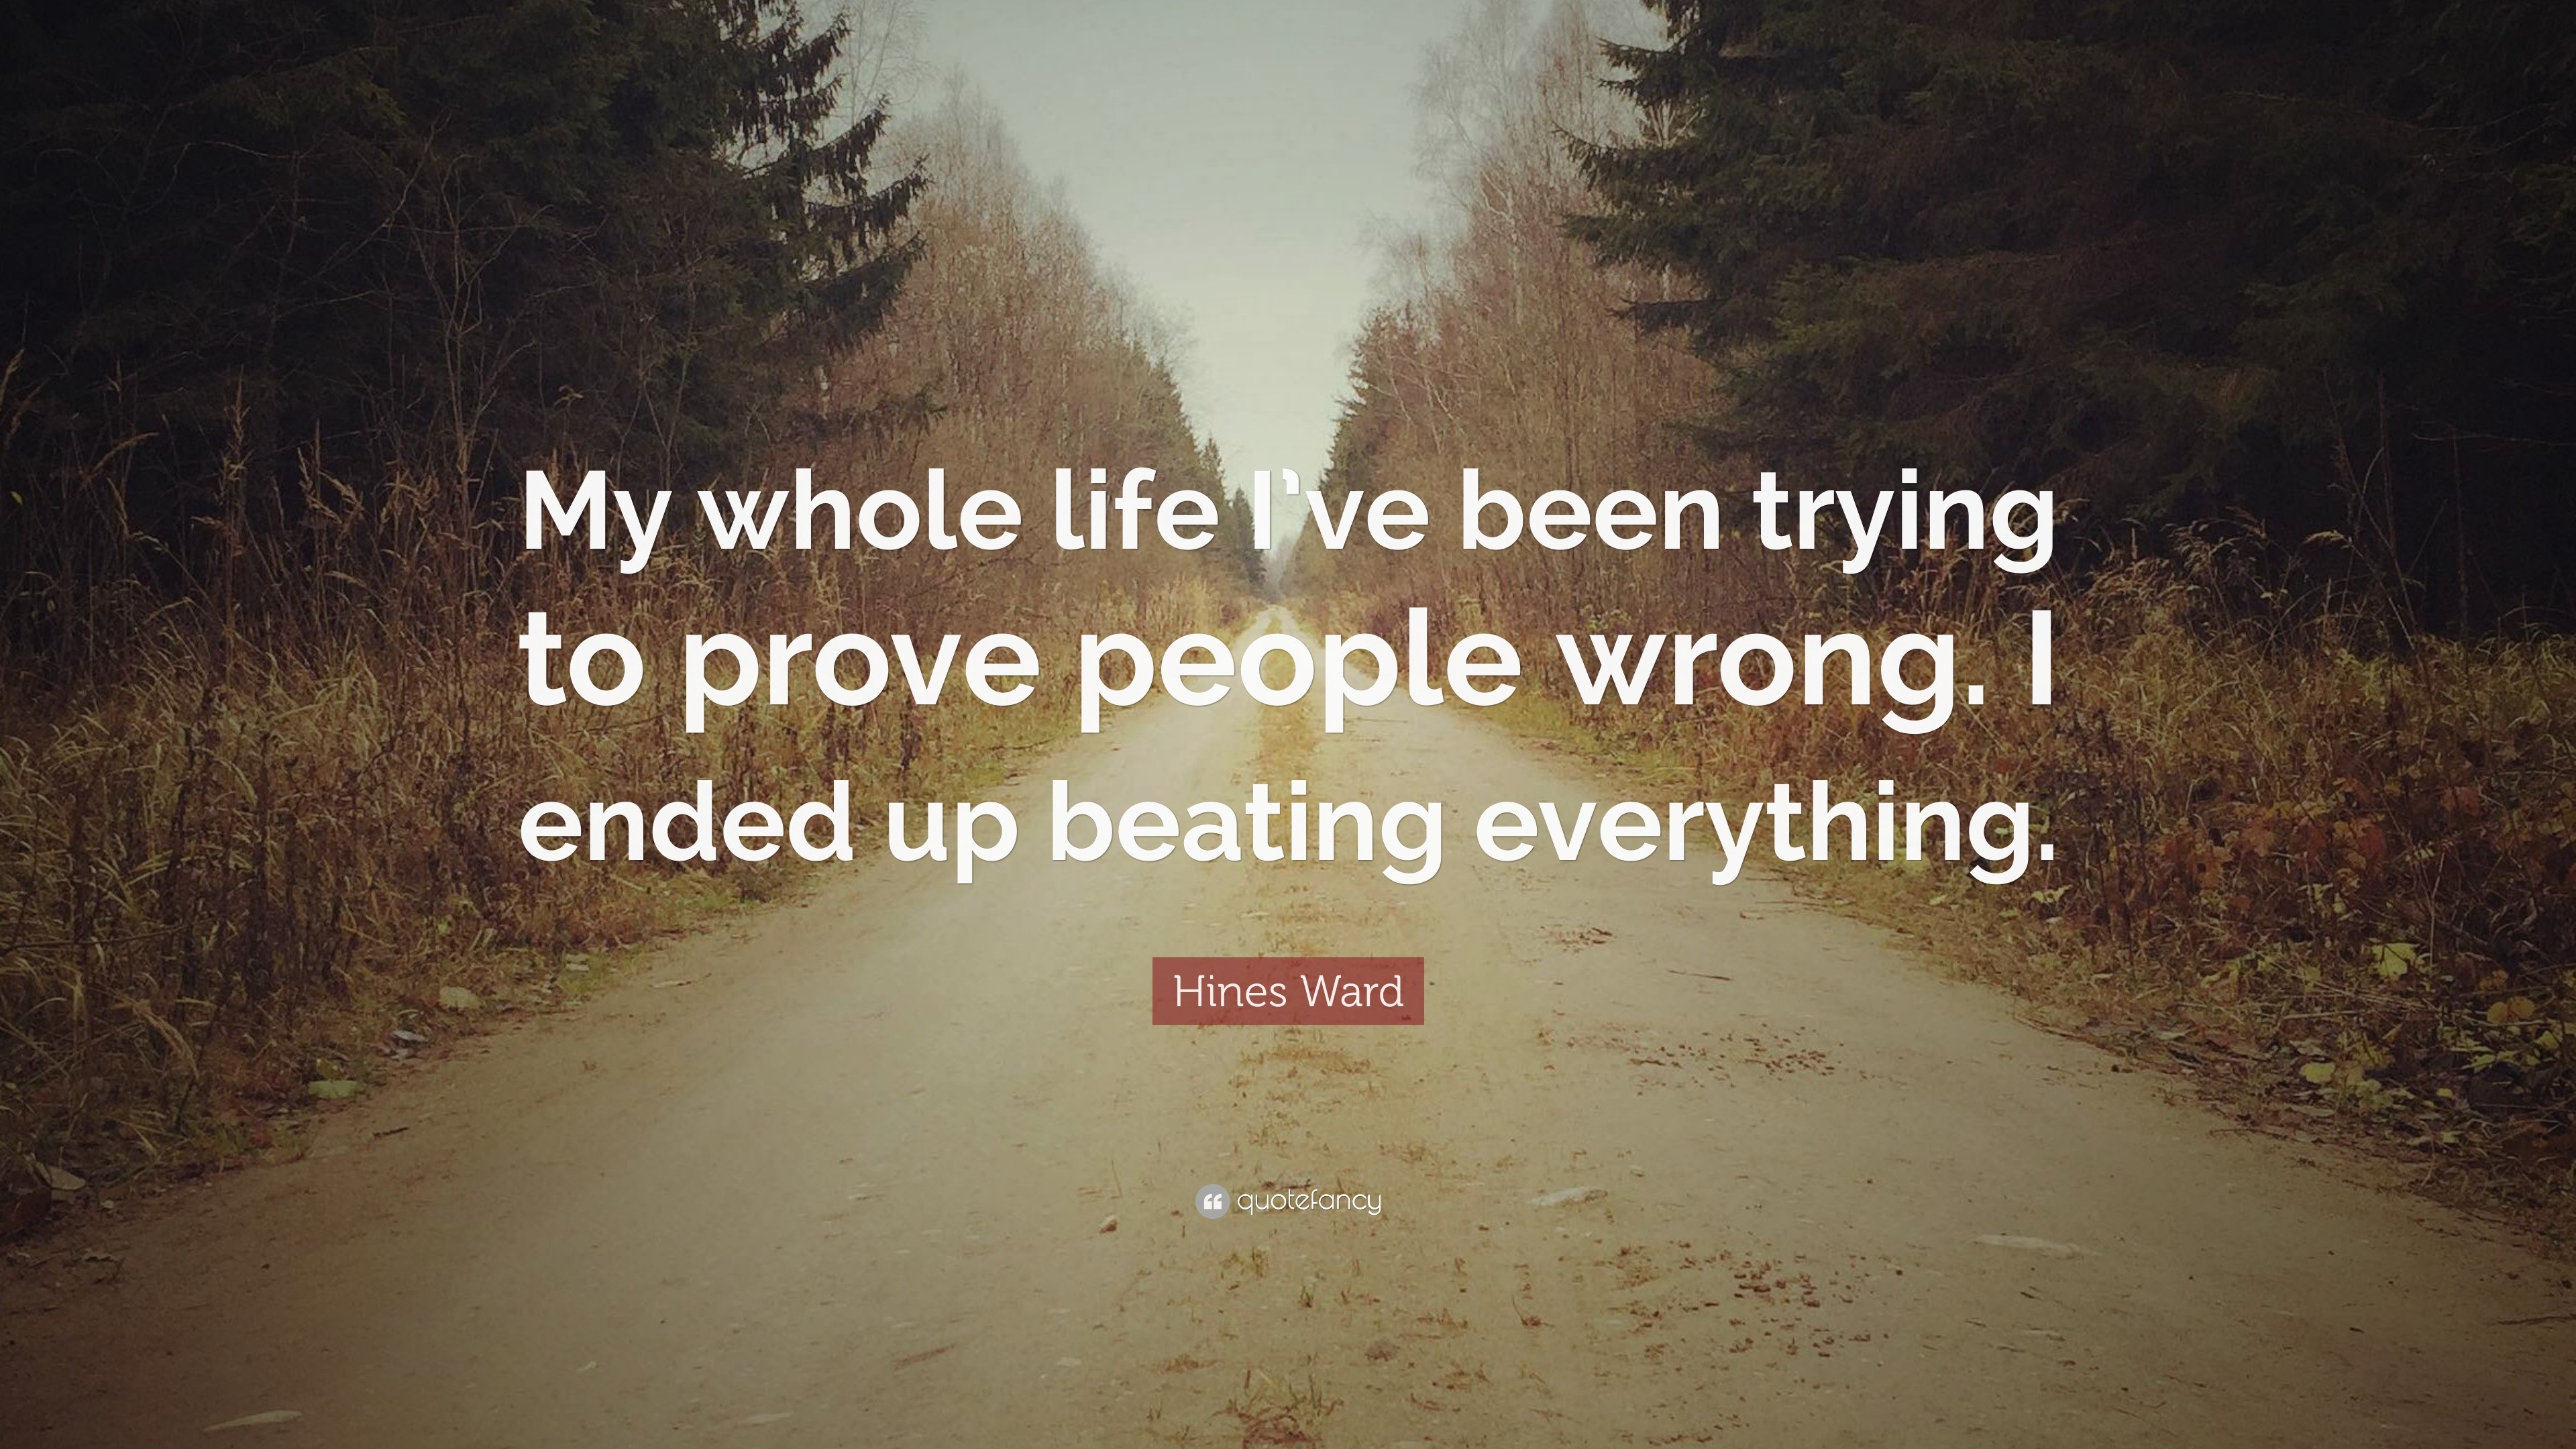 Hines Ward Quote: “My whole life I’ve been trying to prove people wrong ...